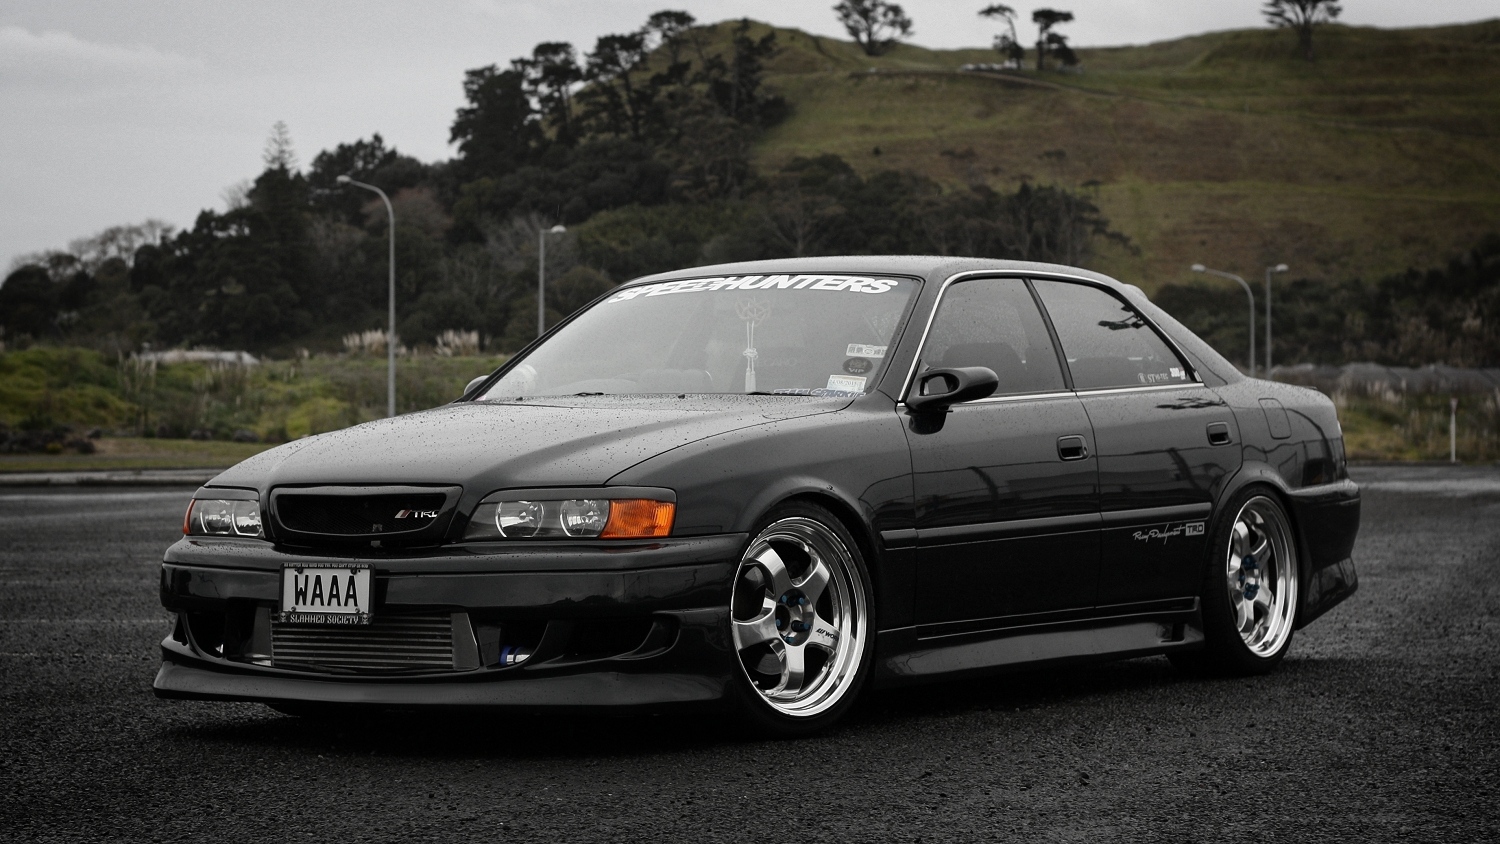 Jzx100 Toyota Chaser Jzx100 Toyota Jdm Tuner Cars